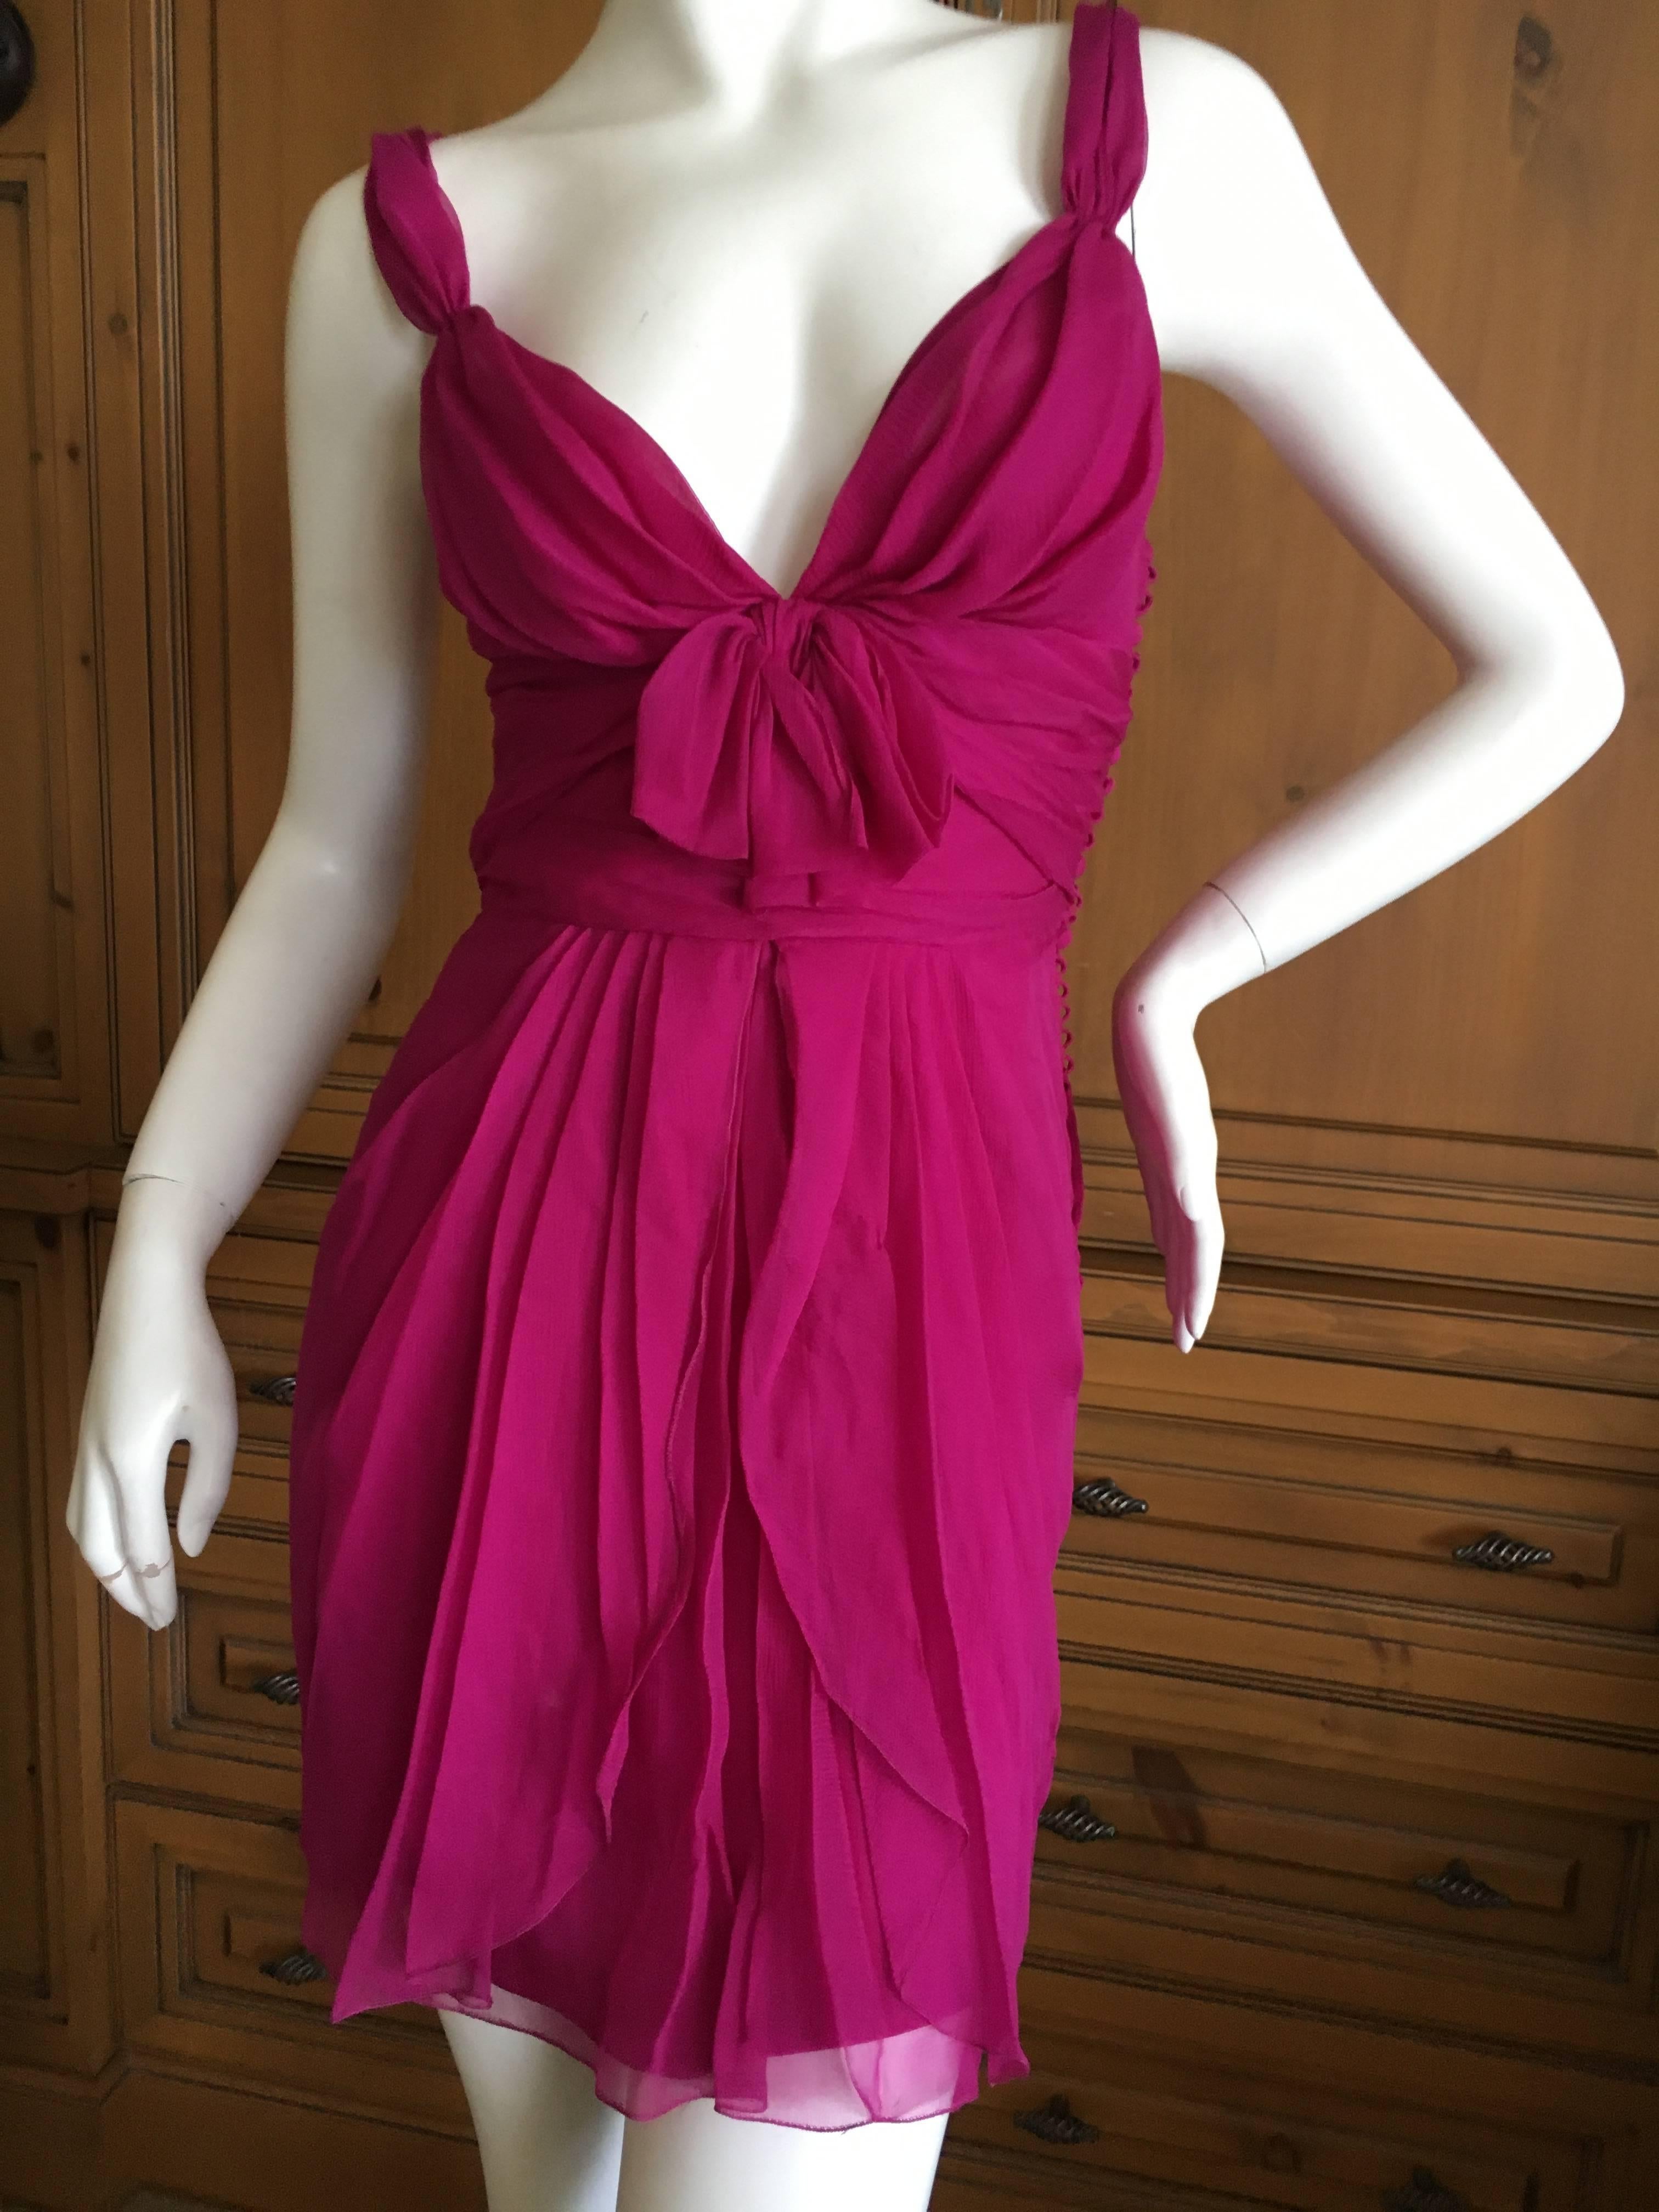 Christian Dior Raspberry Silk Chiffon Mini Dress or tunic.
By John Galliano. 
Size 34
Bust 34"
Waist 36"
HIps 38"
Length 33"
Excellent condition